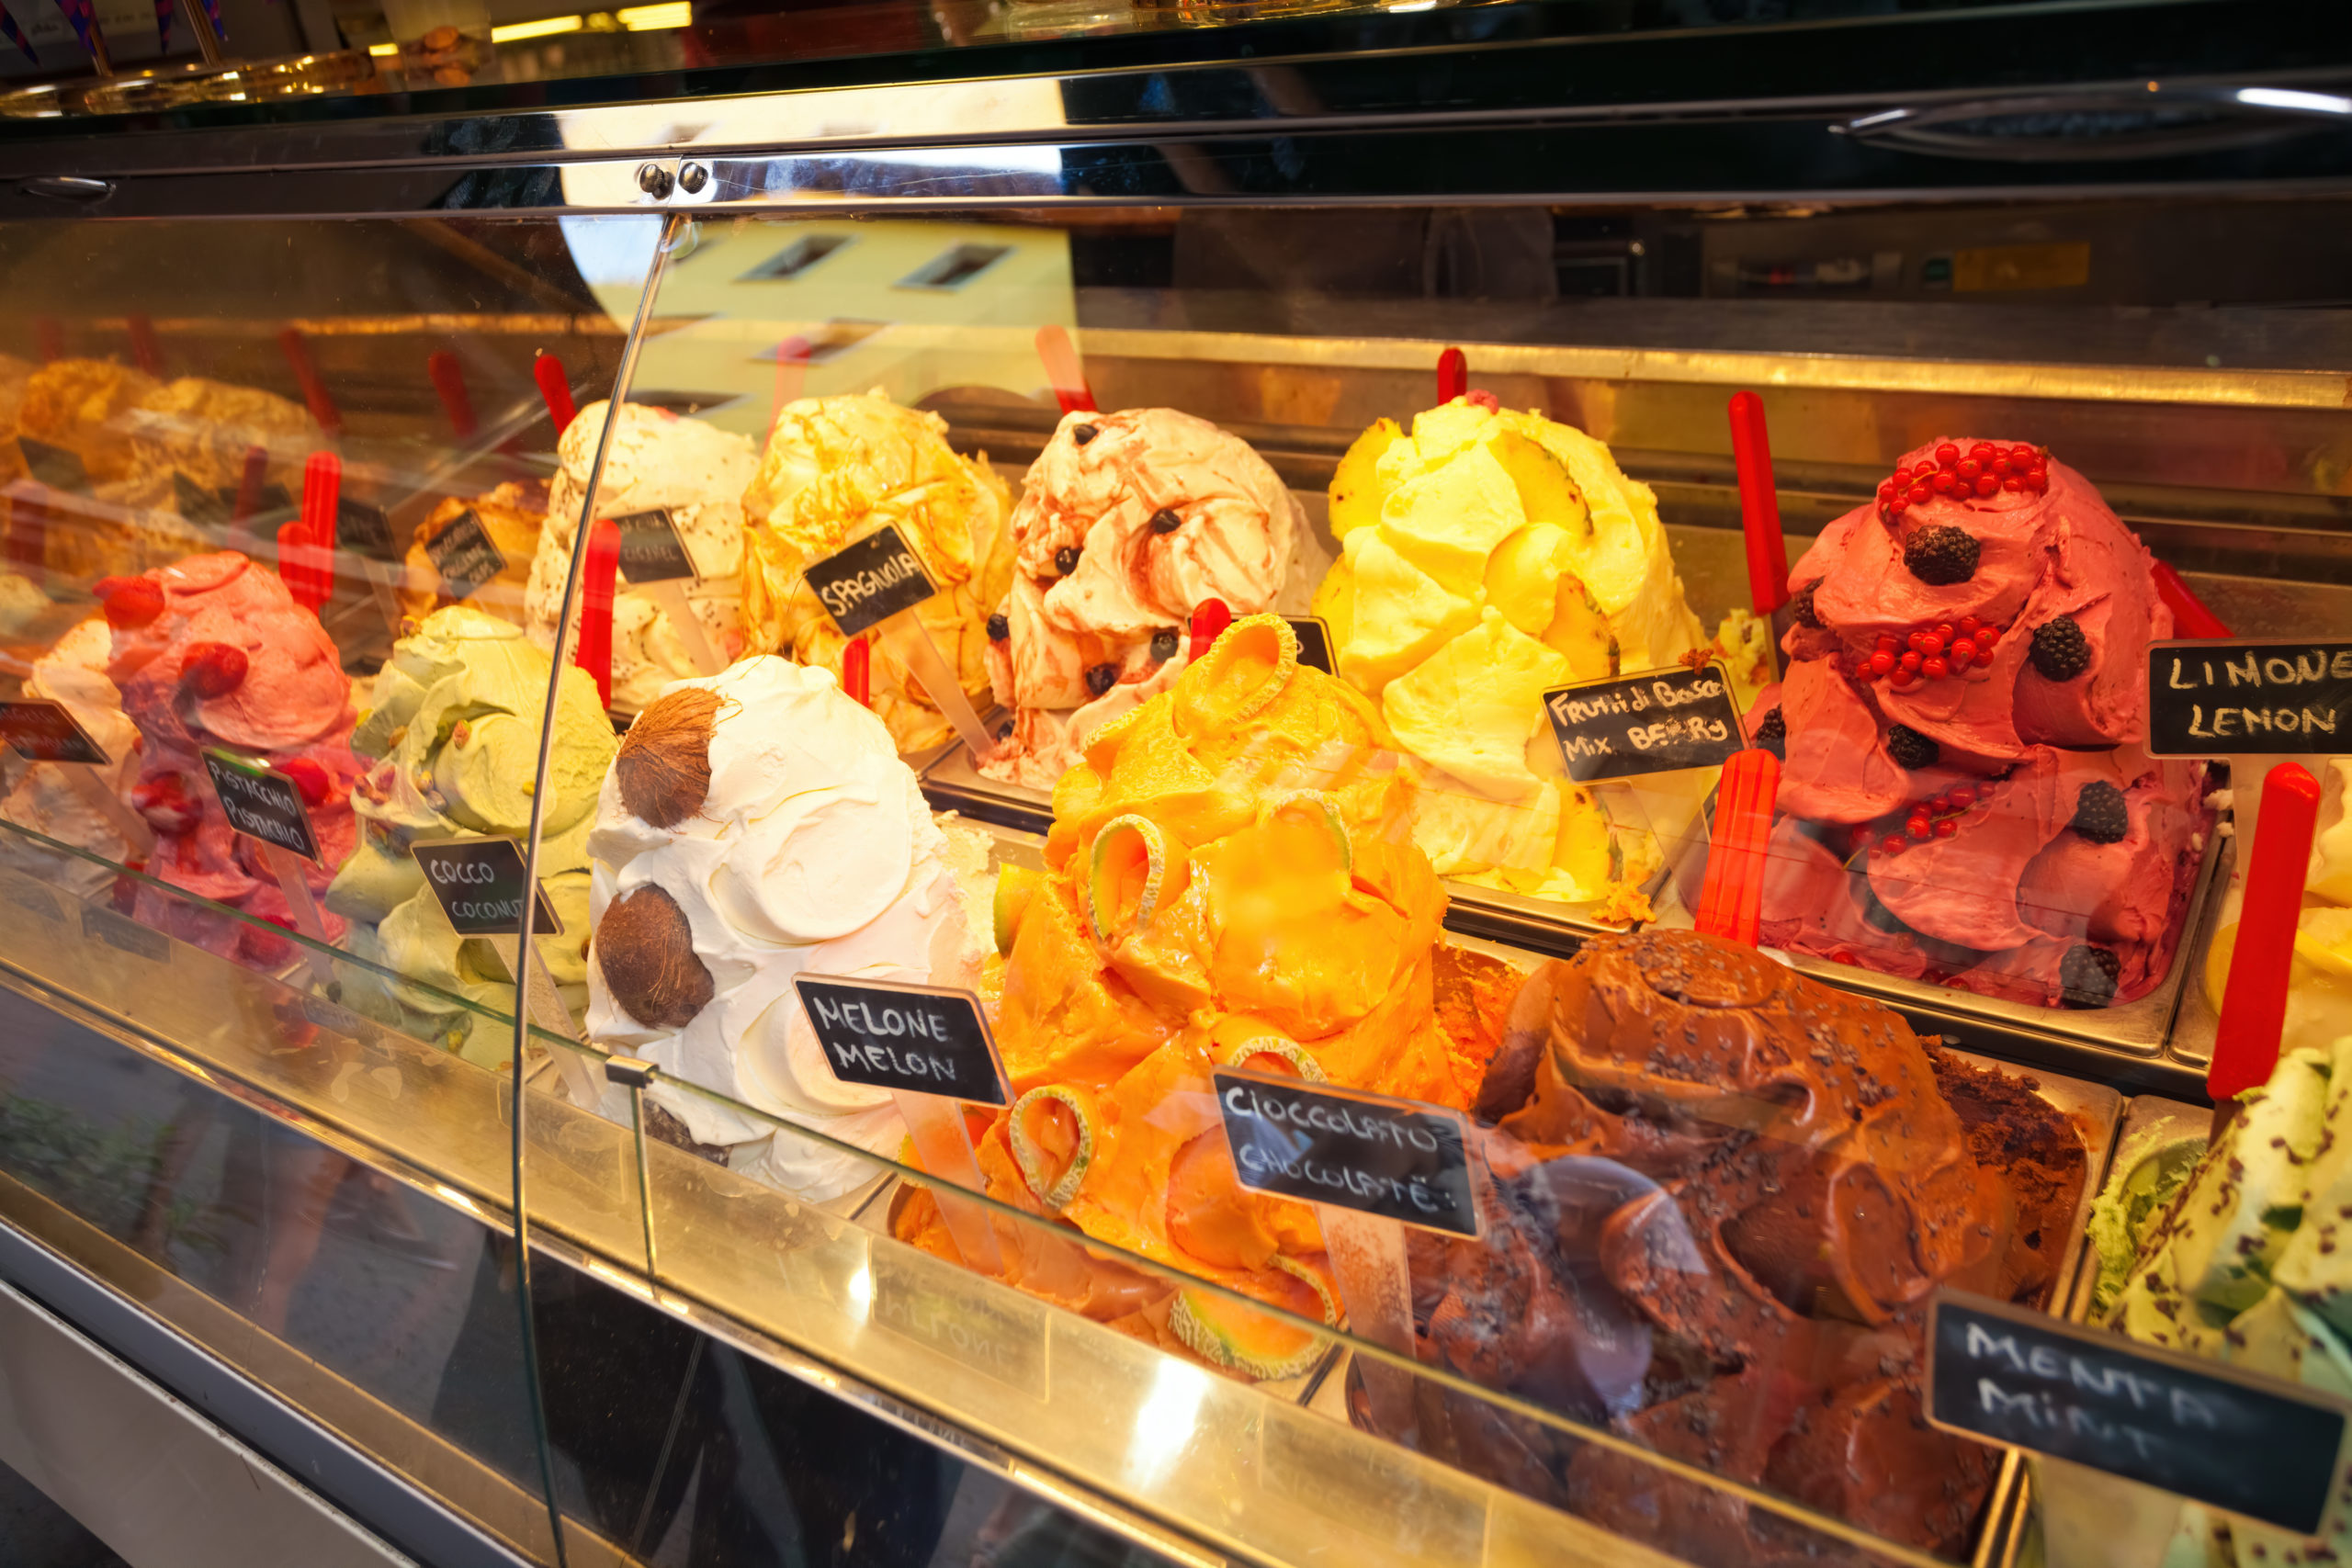 Things to Do in Florence: Gelato in Glass Freezer